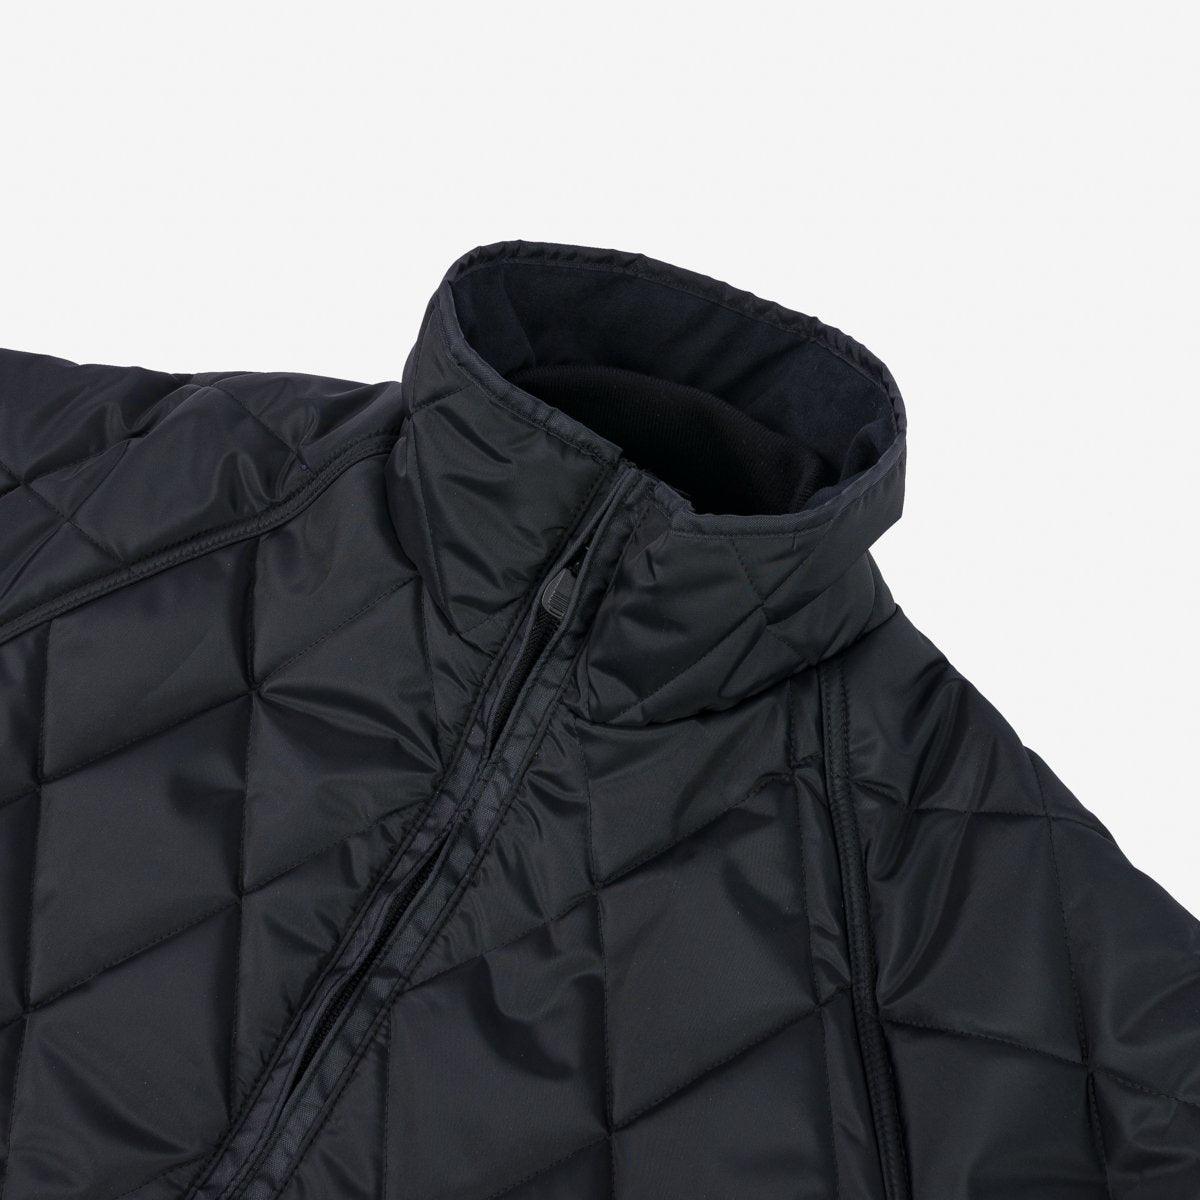 Iron Heart IHJ-127-BLK Primaloft® Quilted Rider's Jacket - Black - Guilty Party